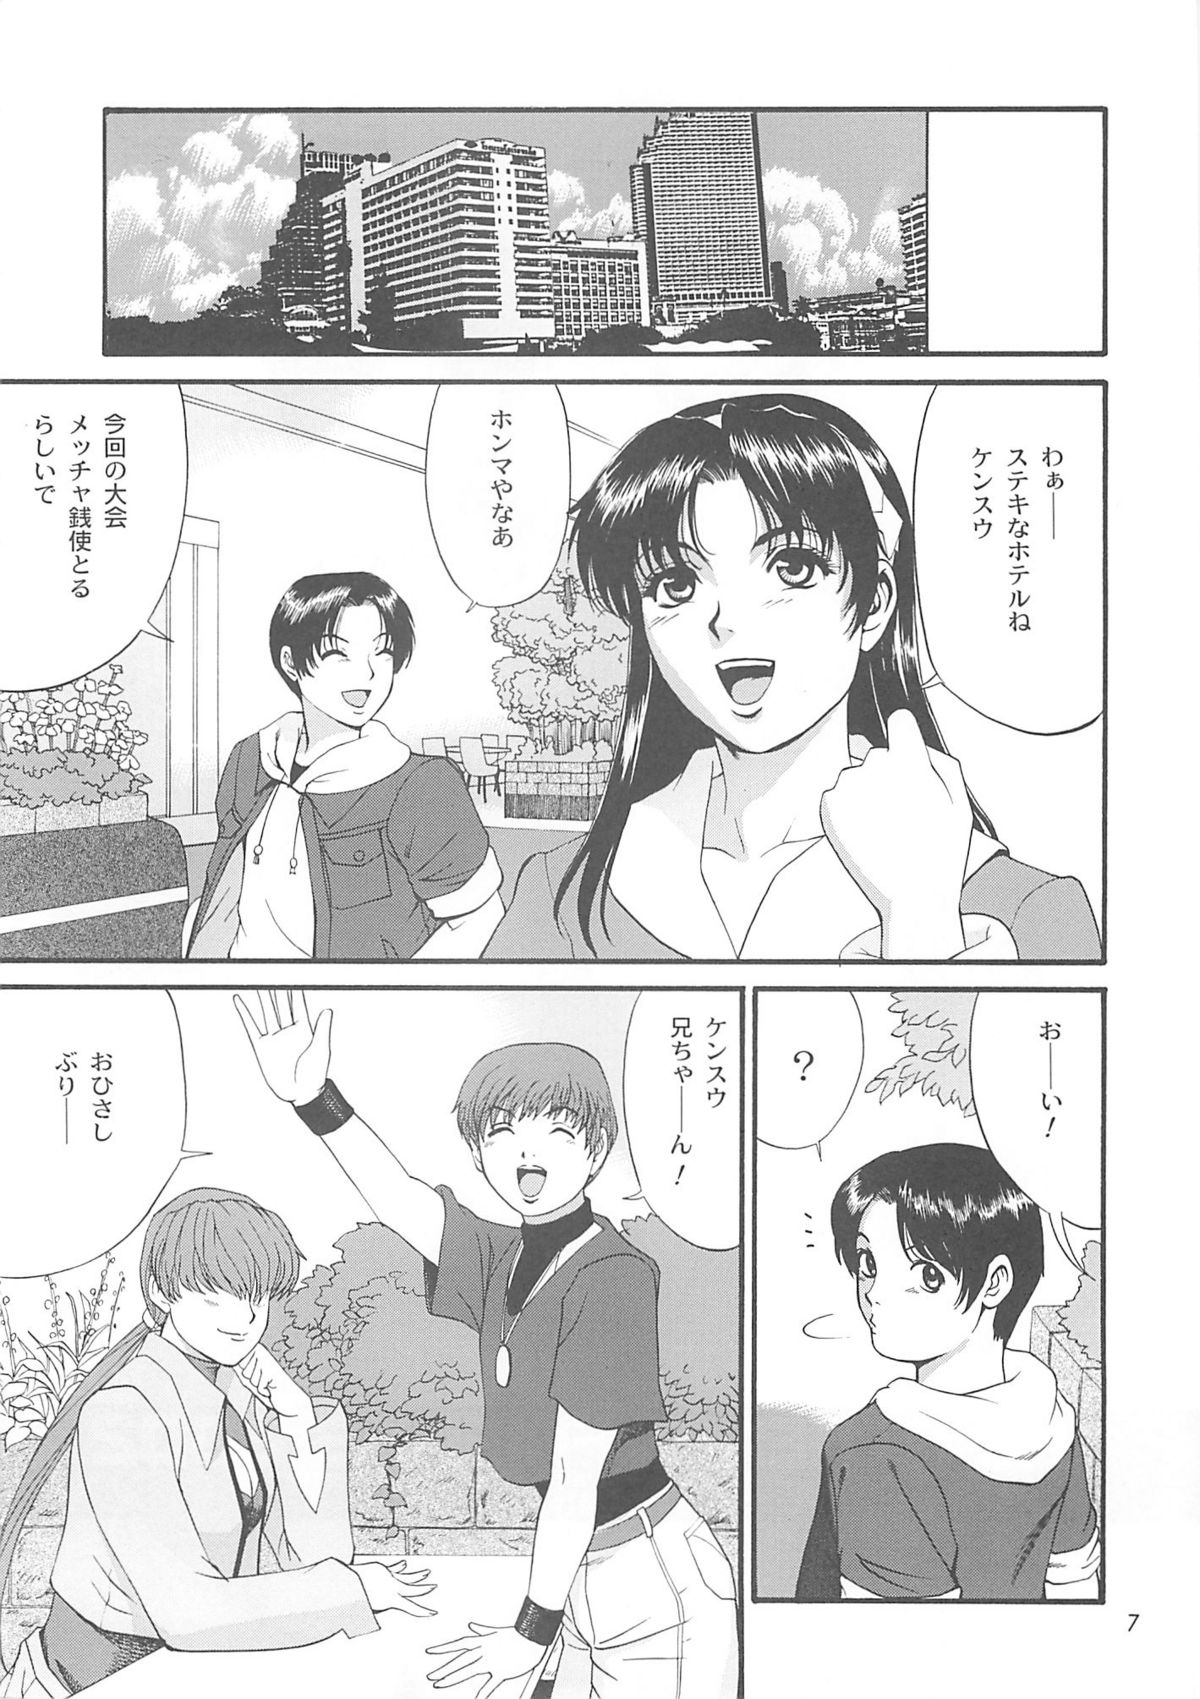 (C63) [Saigado] The Athena & Friends 2002 (King of Fighters) page 6 full